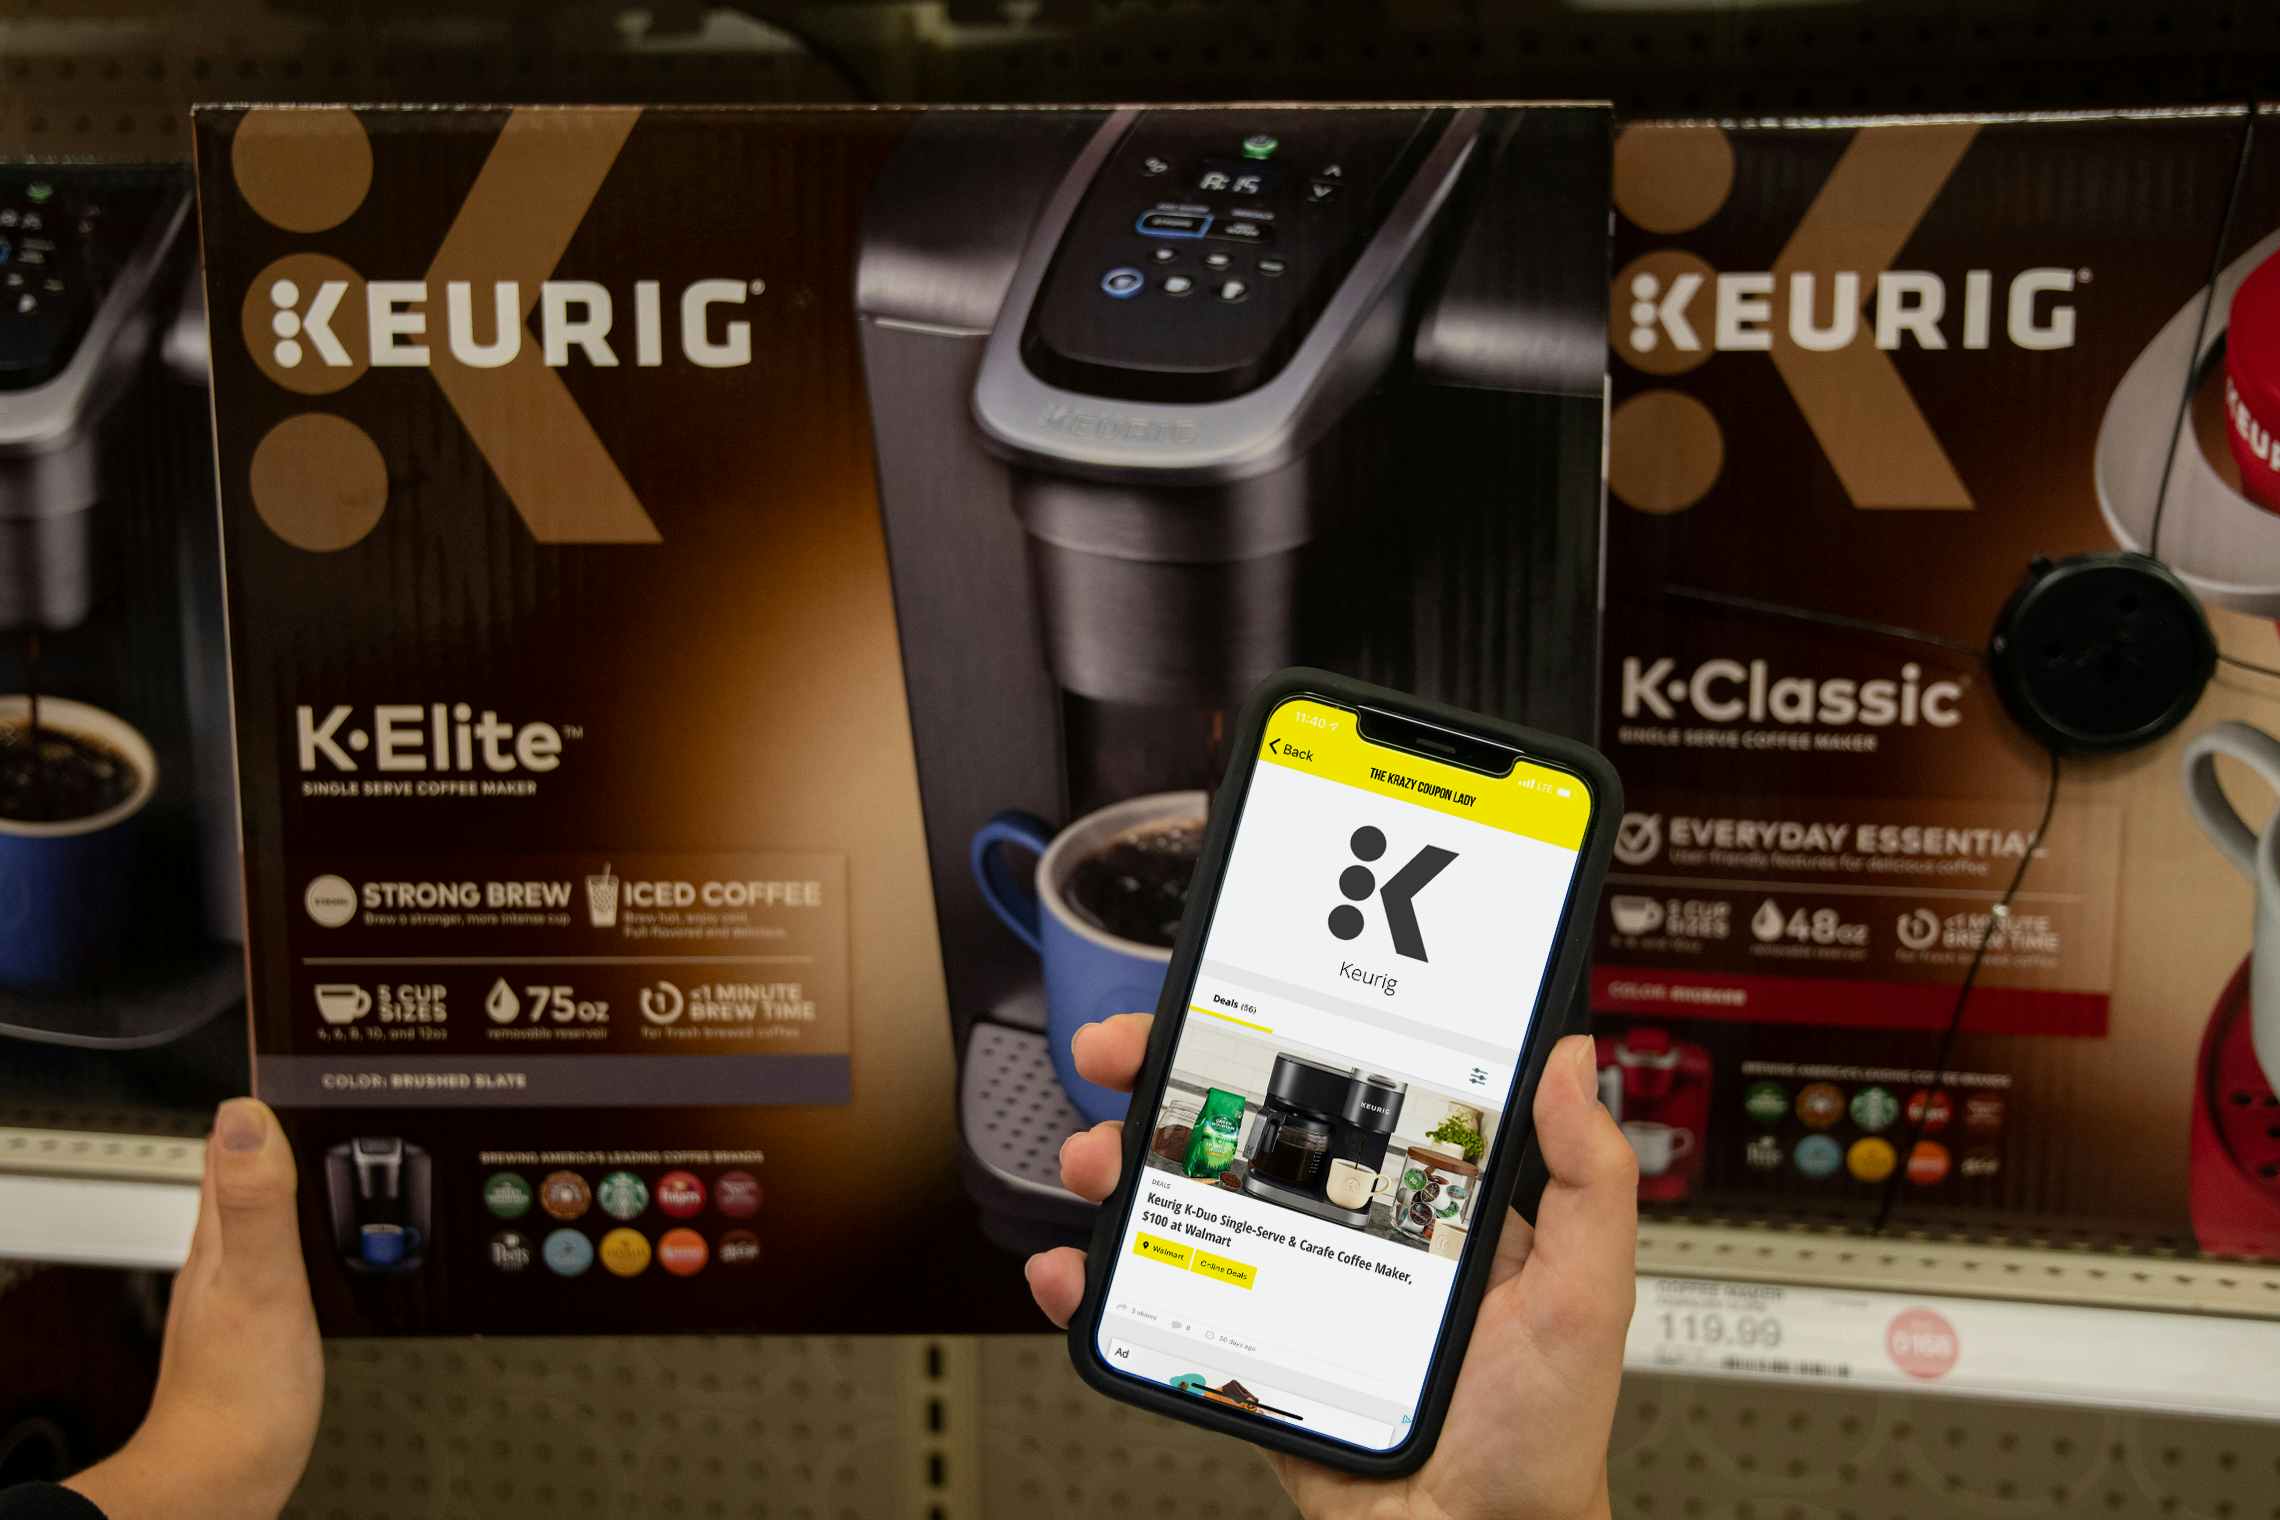 Krazy coupon lady app on a cell phone next to a Keurig coffee maker.